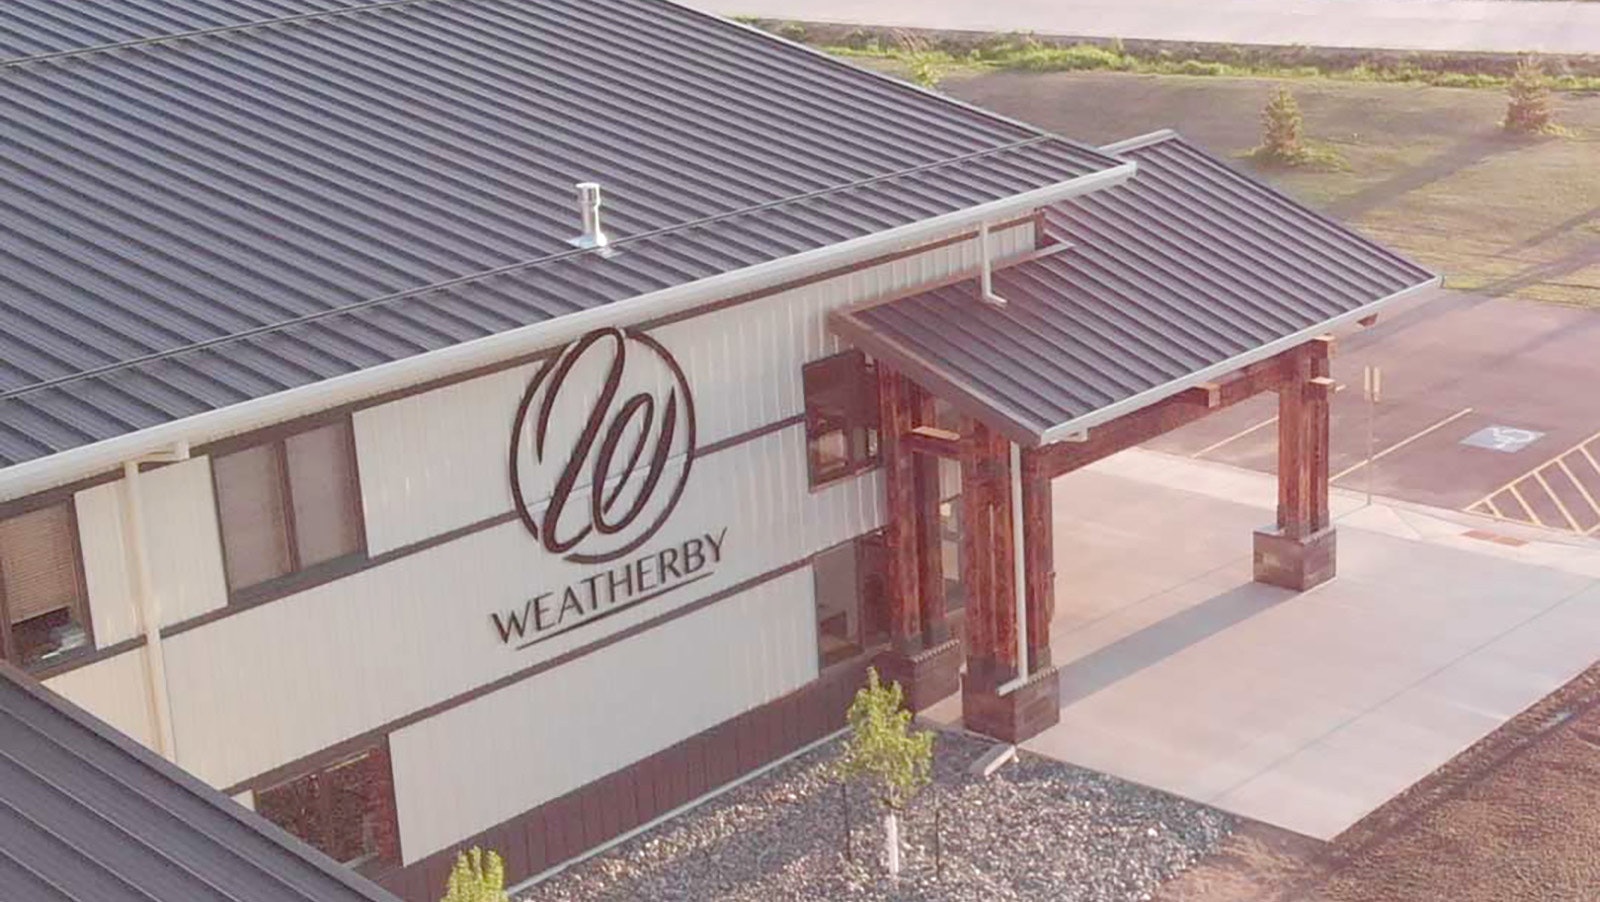 Adam Weatherby of Weatherby Inc. said that a raft of gun control measures passed in Washington state this week make him glad Weatherby choose to locate its manufacturing facility in Wyoming.